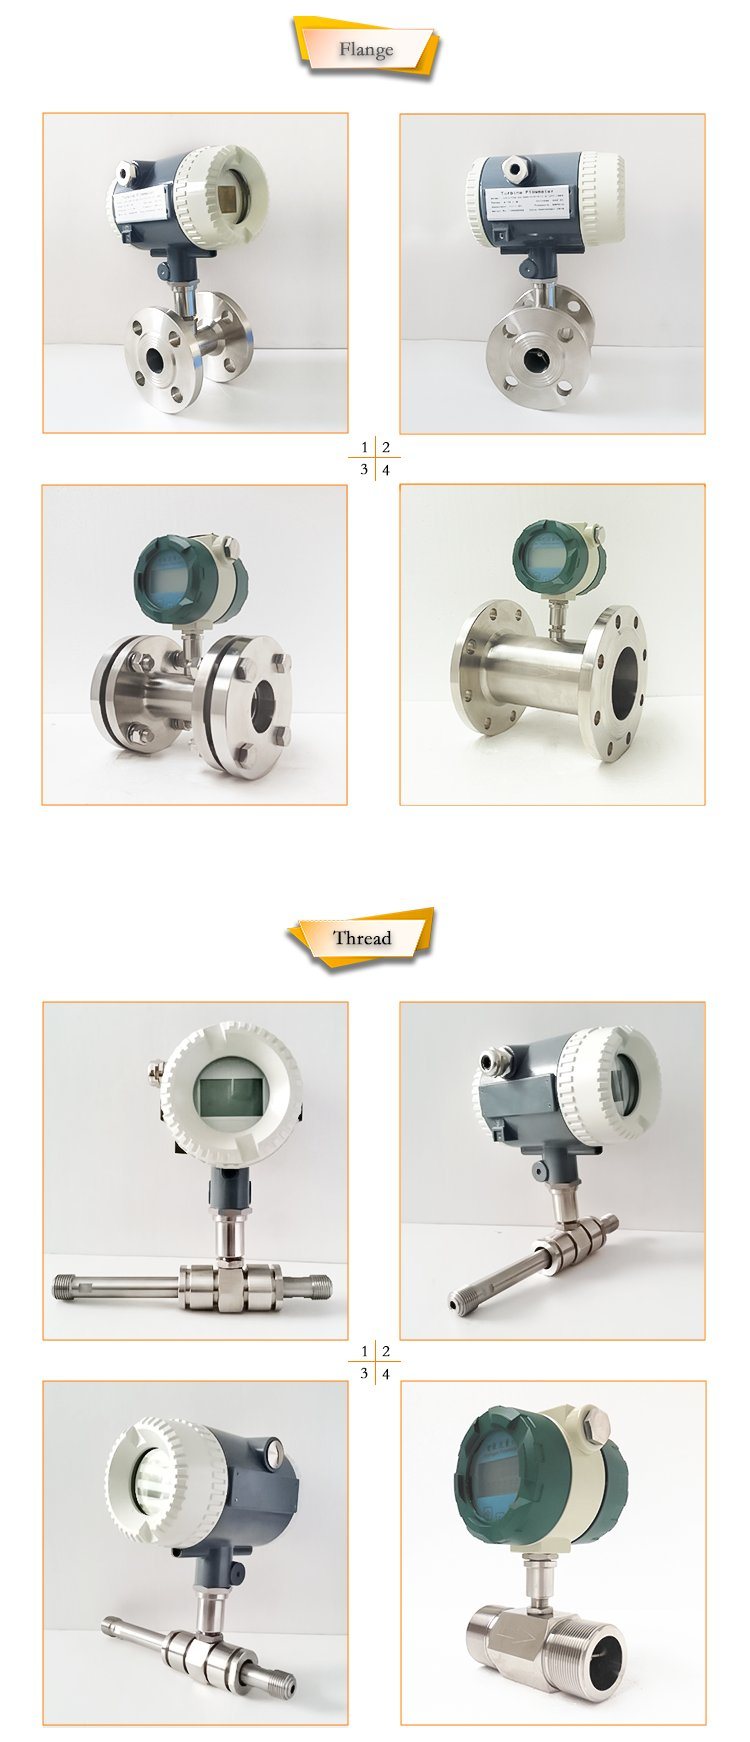 LED Flange Connection Purified Water Turbine Flow Meter